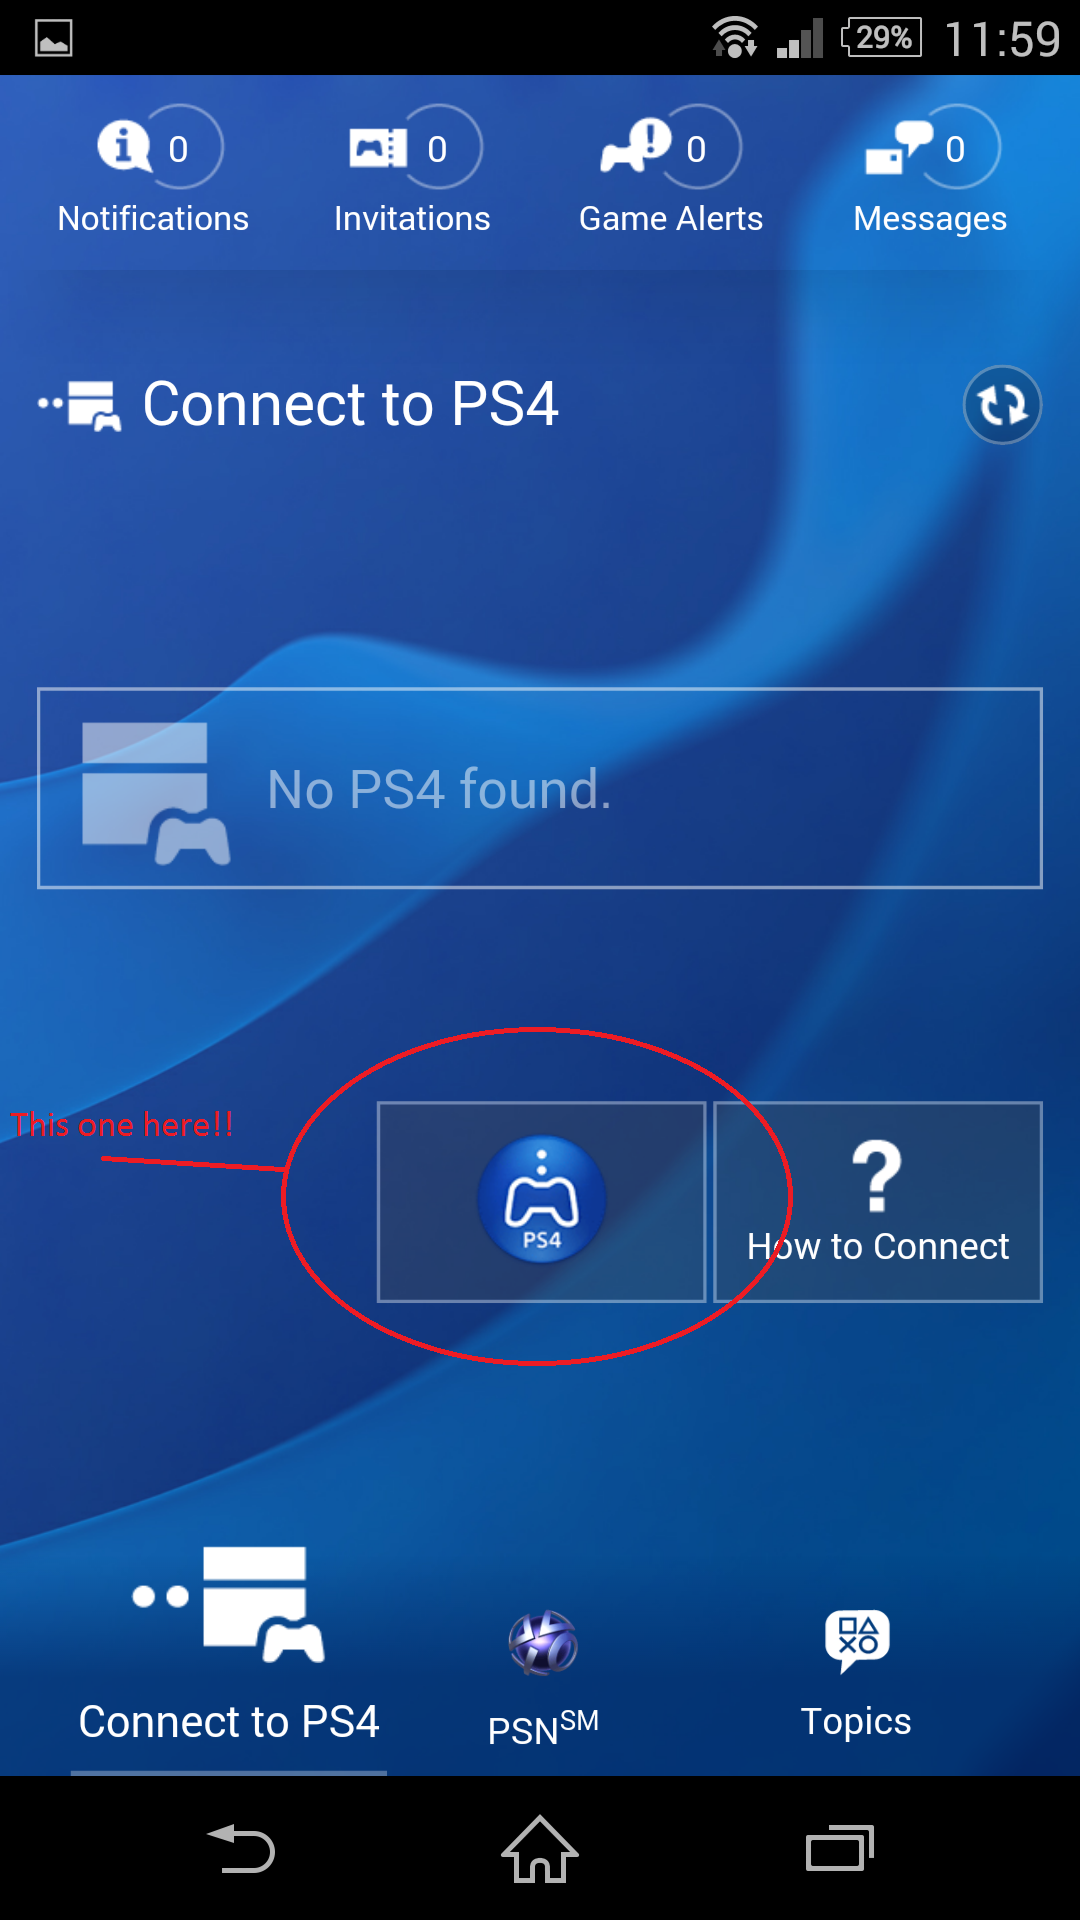 PlayStation 4 Remote Play Comes to Android Devices With Firmware 7.00